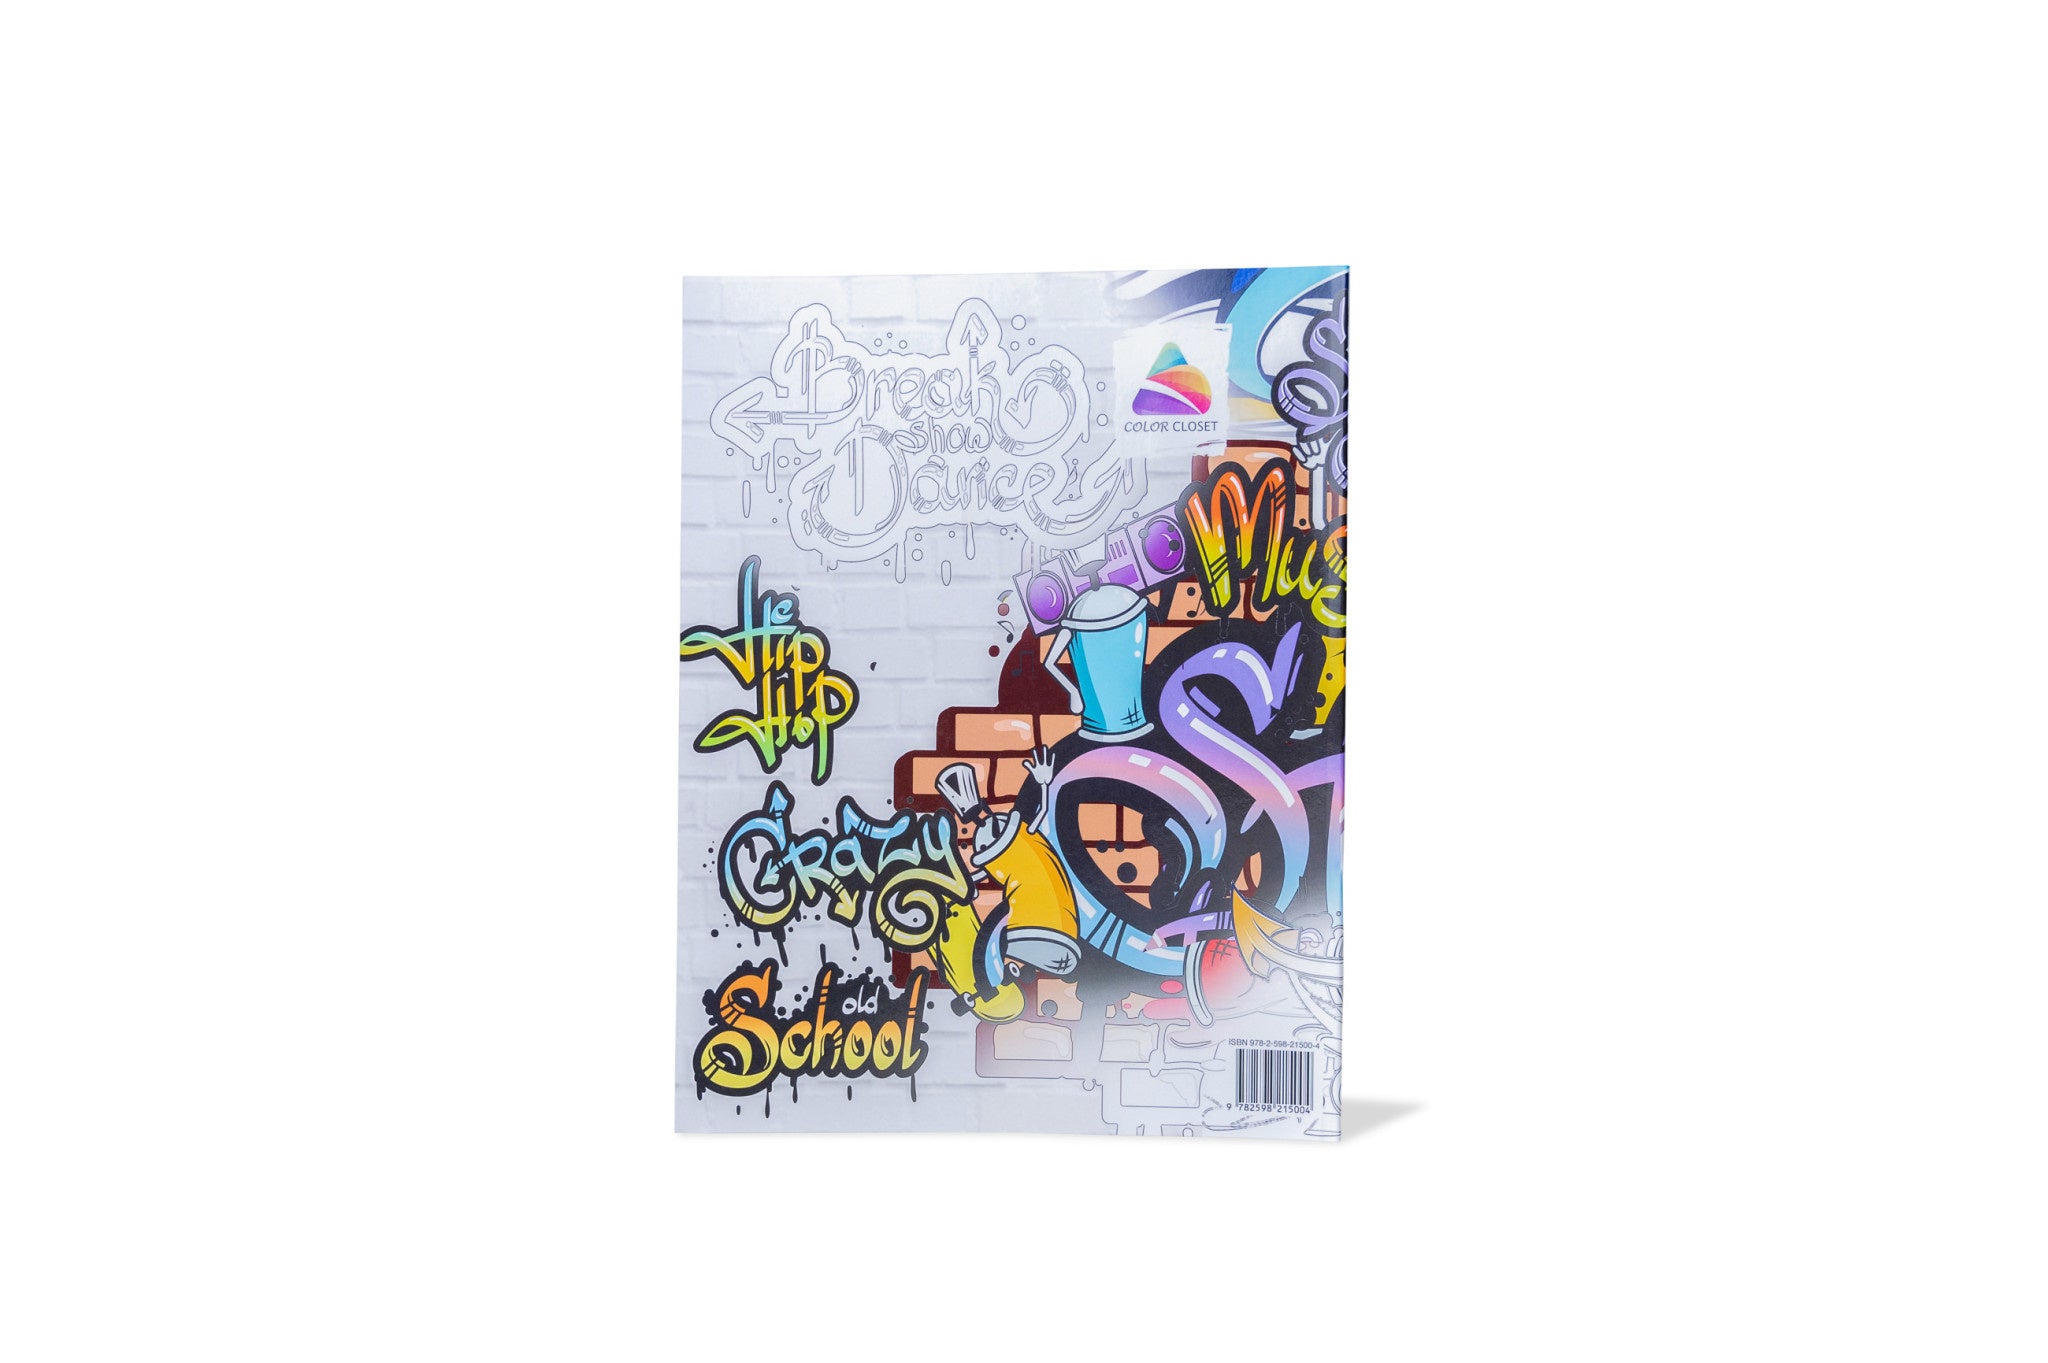 Graffiti Coloring Book: Street Art Coloring Books for Adults - Wynwood Walls Shop